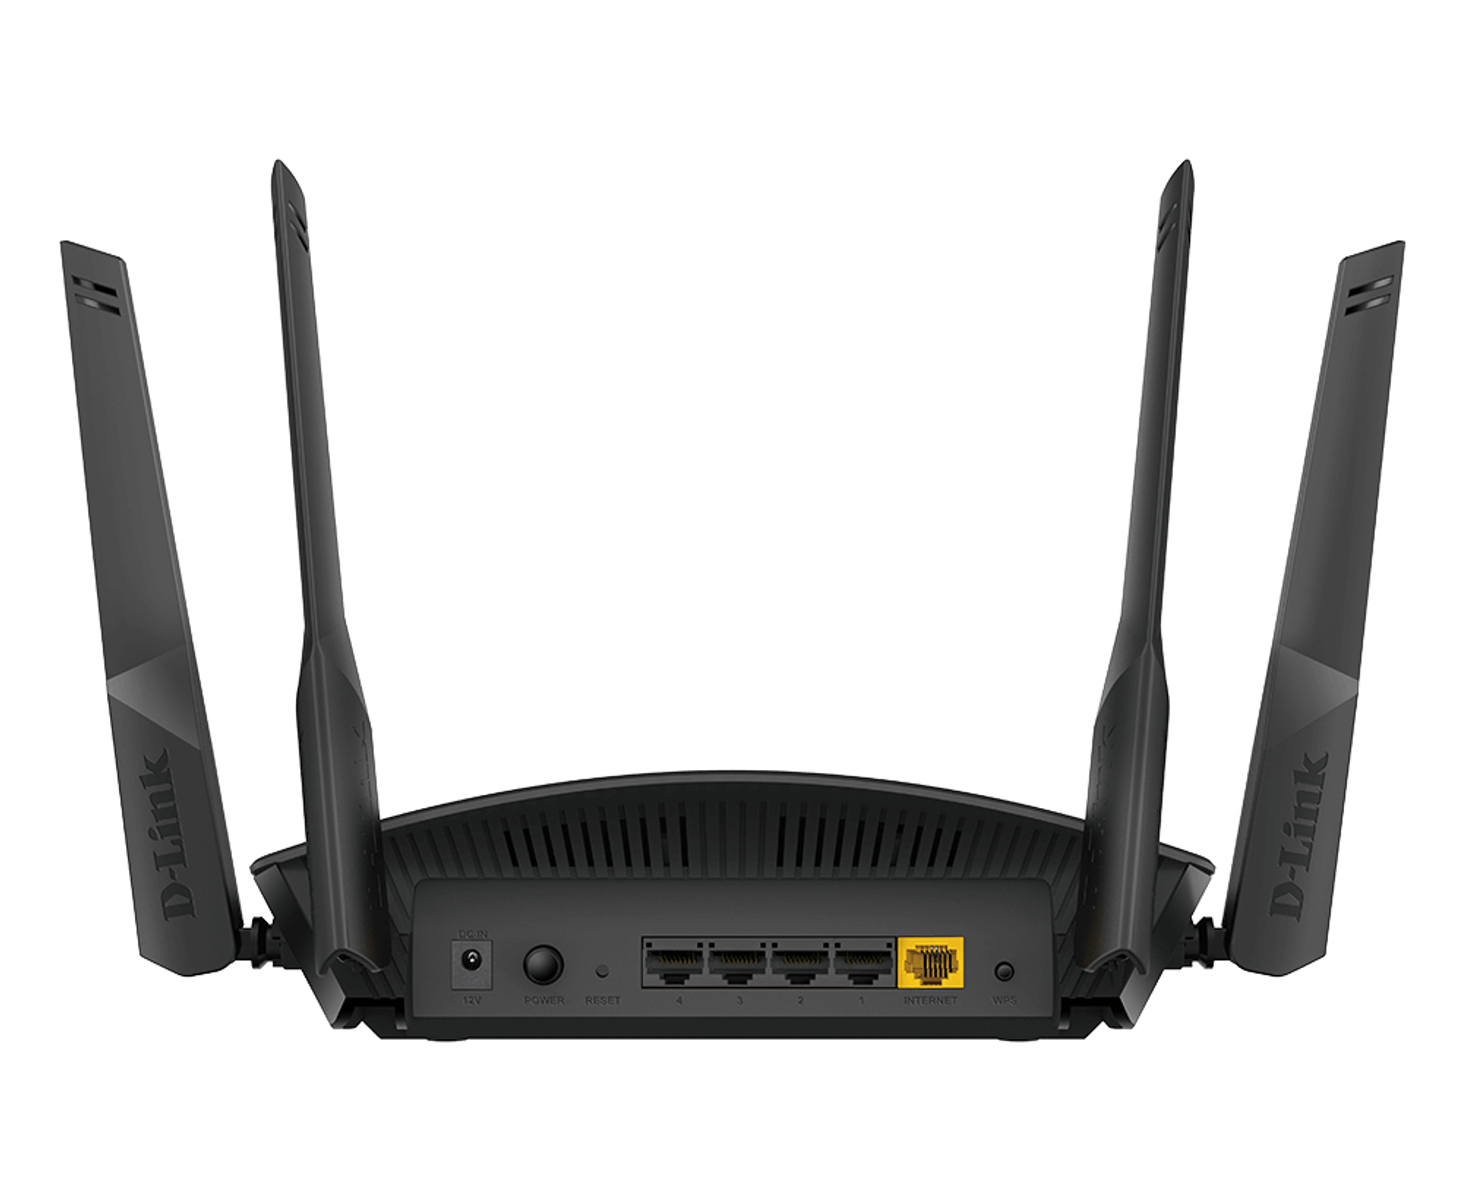 D-LINK AX1800 EXO WI-FI ROUTER 6 Router